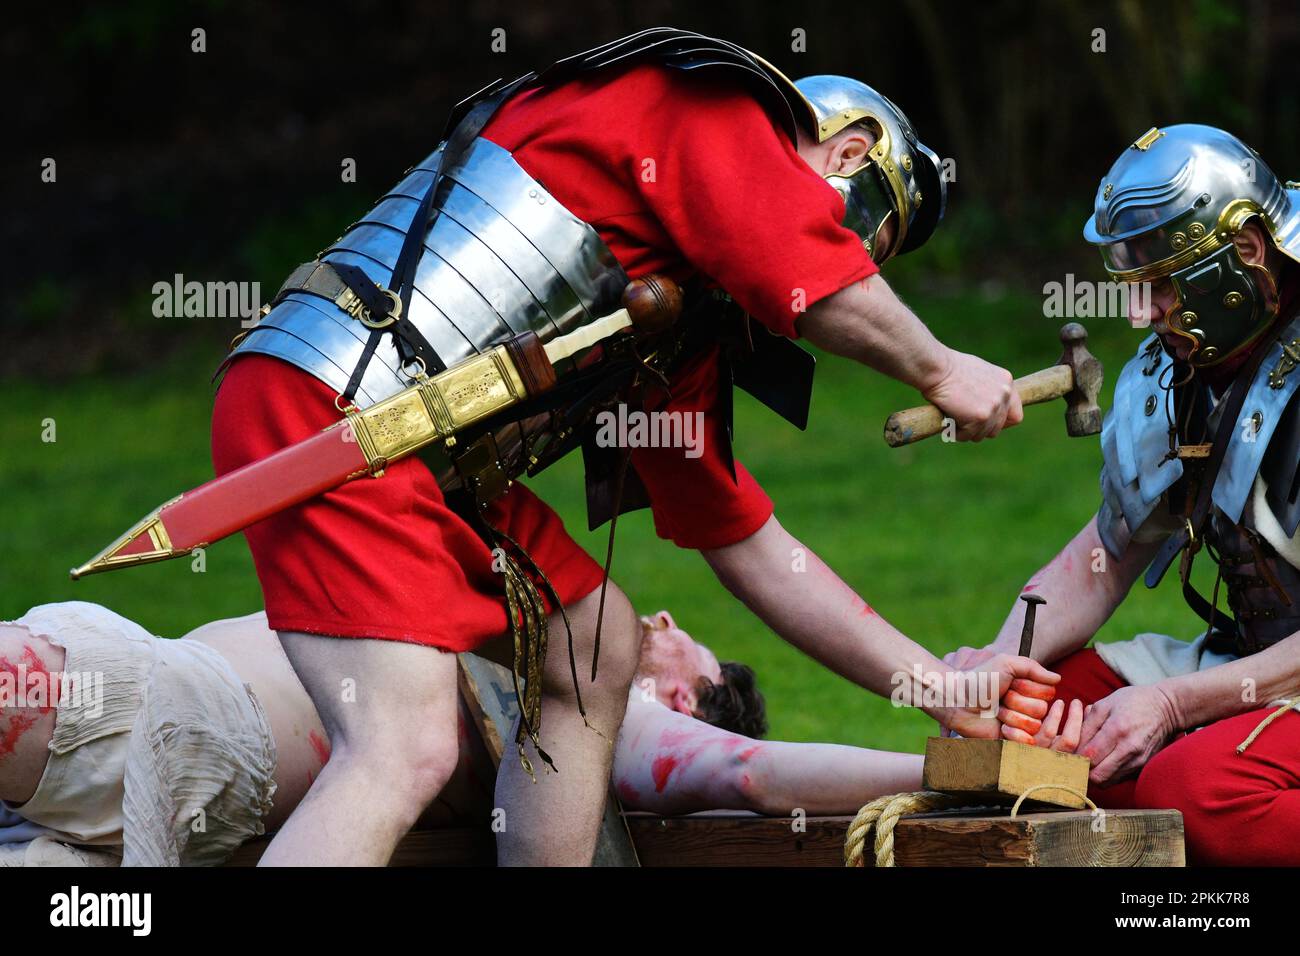 Edinburgh Scotland, UK 08 April 2023. Edinburgh Easter Play, The Life of Jesus Christ takes place in Princes Street Gardens with a cast of around 30 people in period costumes, including Antonine Guards. credit sst/alamy live news Stock Photo